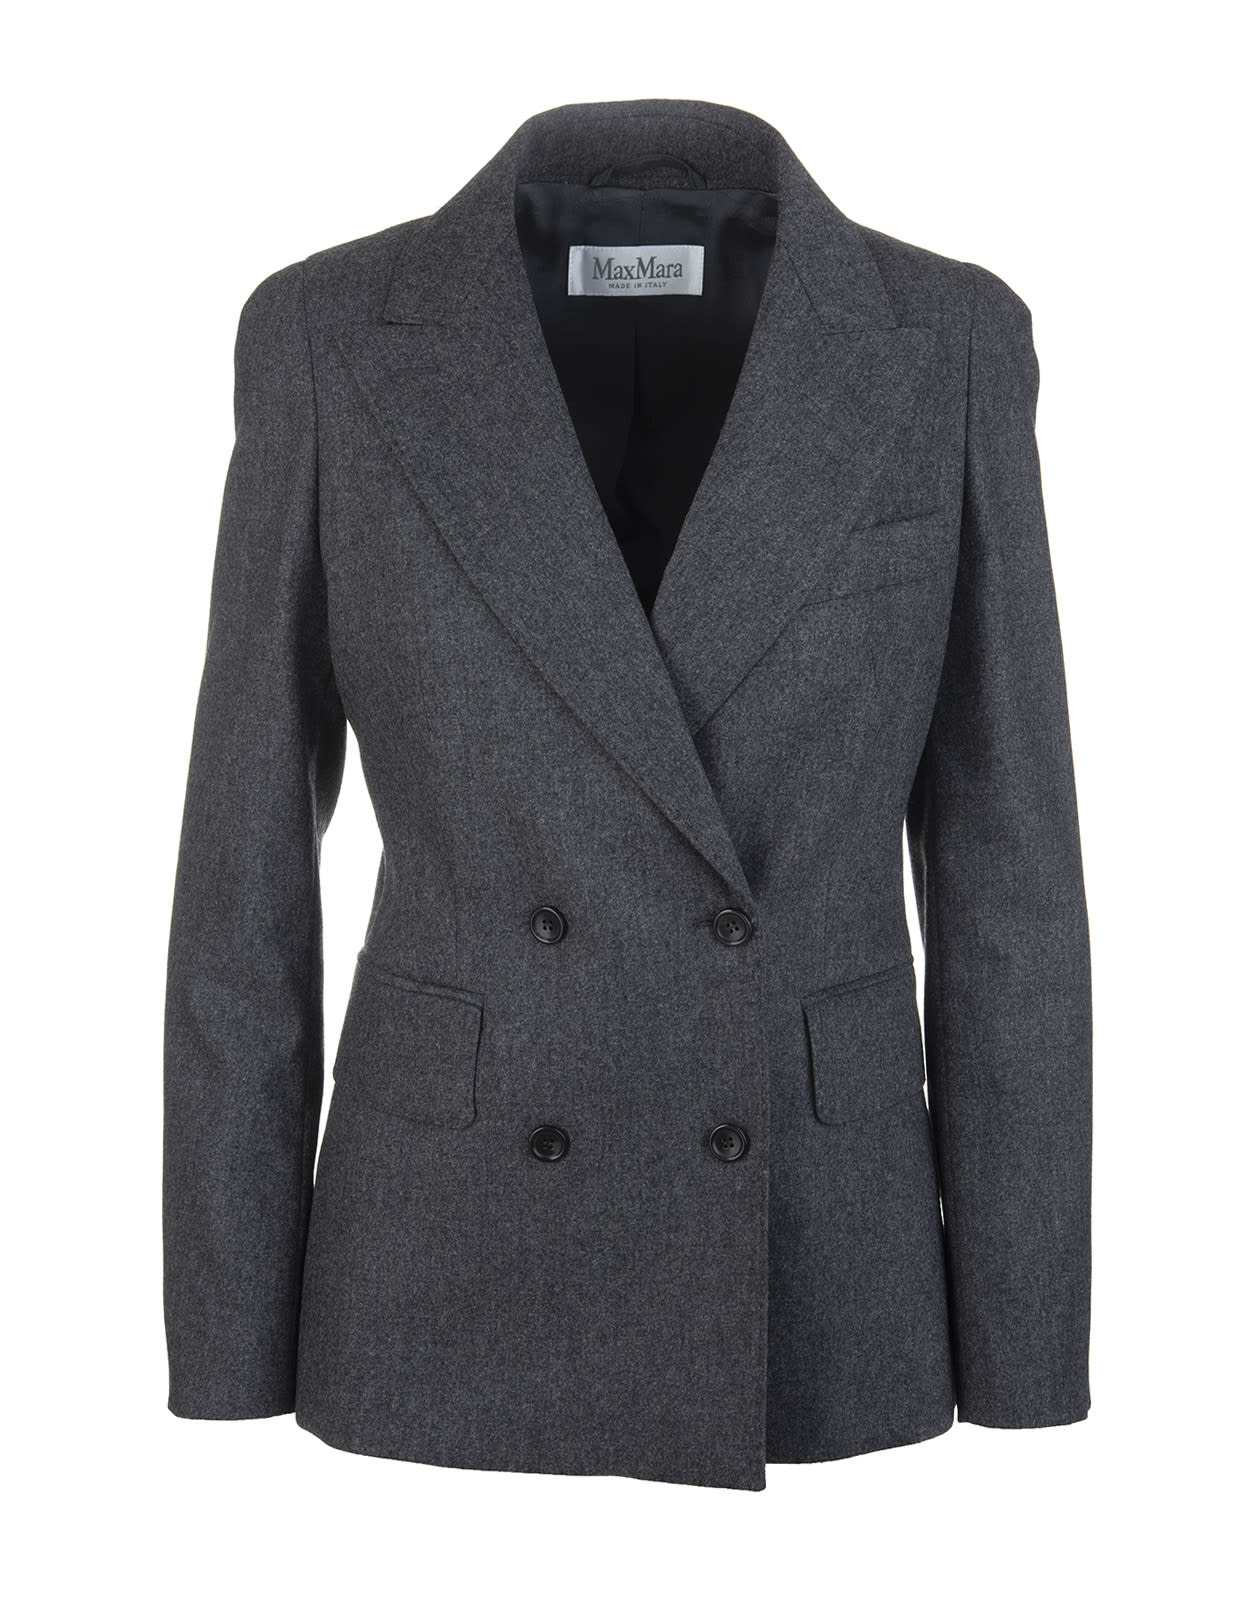 Max Mara Arad Jacket In Grey Flannel Wool And Cashmere